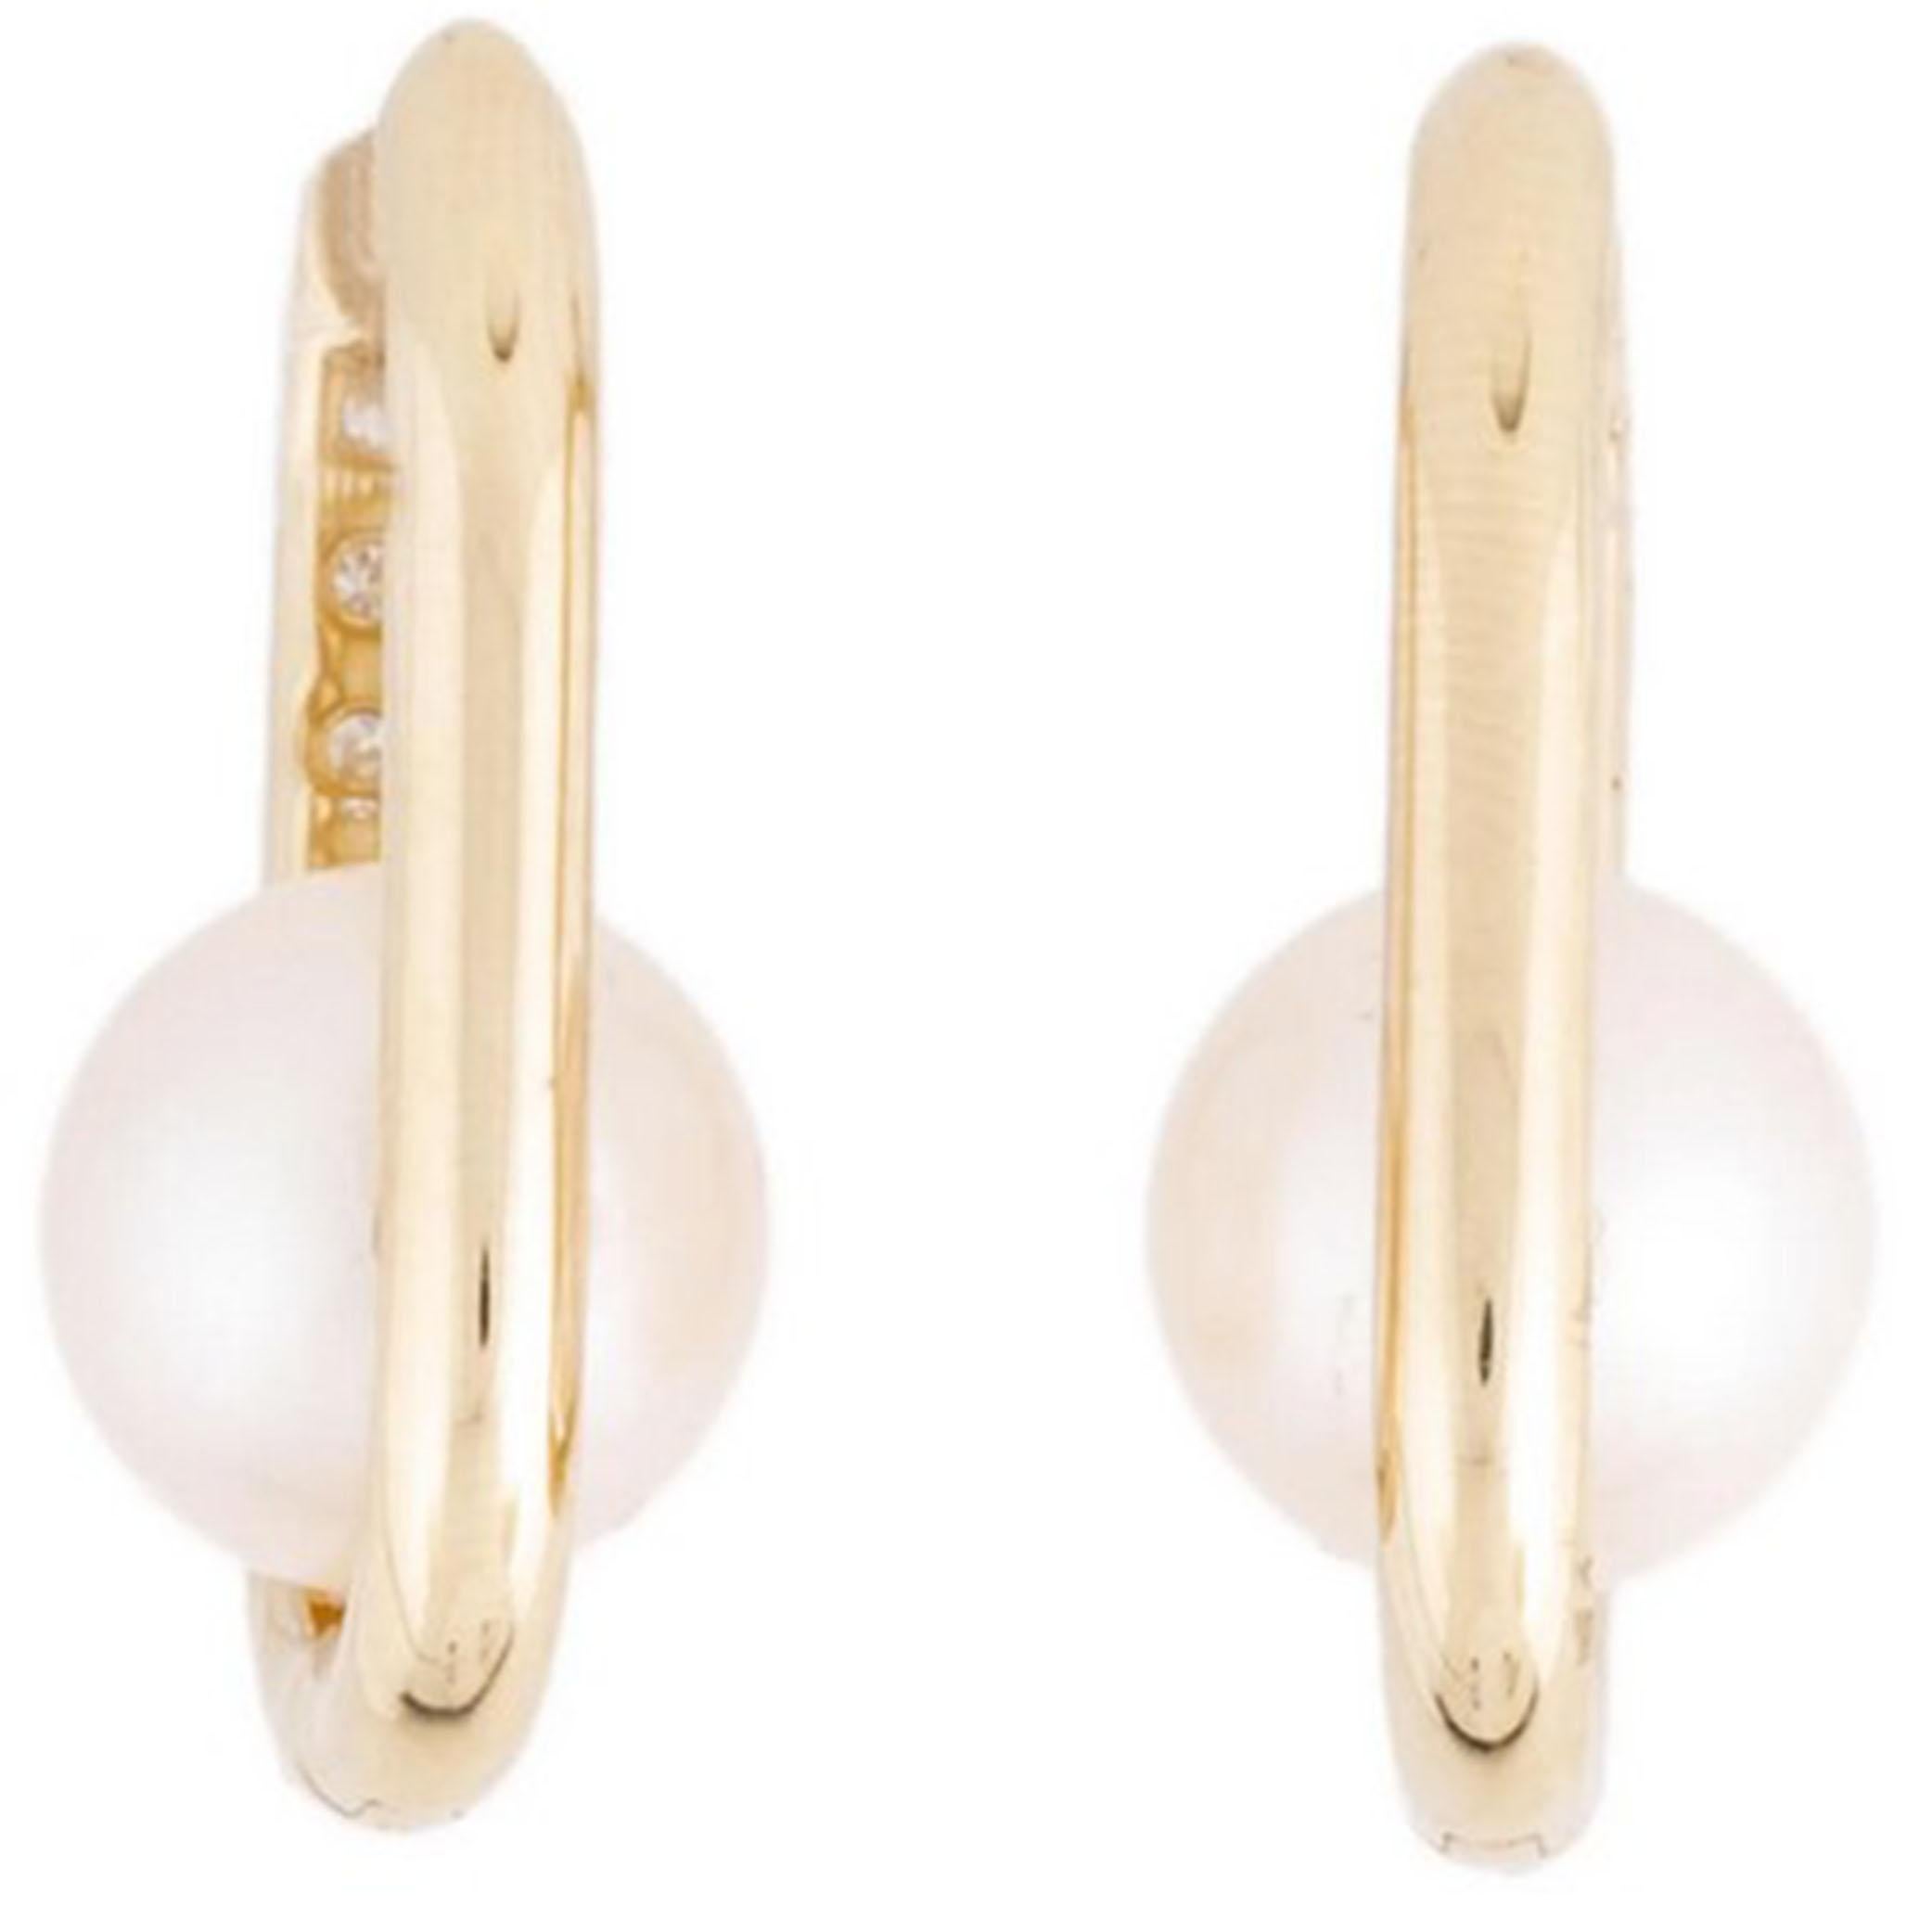 Origin: Japan
Pearl Type: Akoya Pearls
Pearl Size: 8.5 - 9.0 MM in Diameter
Pearl Color: White
Pearl Shape: Round 
Pearl Surface: AAA
Pearl Luster: AAA Gem
Pearl Nacre: Top
Diamond:0.20ct
Gold: 14kt Yellow
Seven Seas pearls paper clip collection.